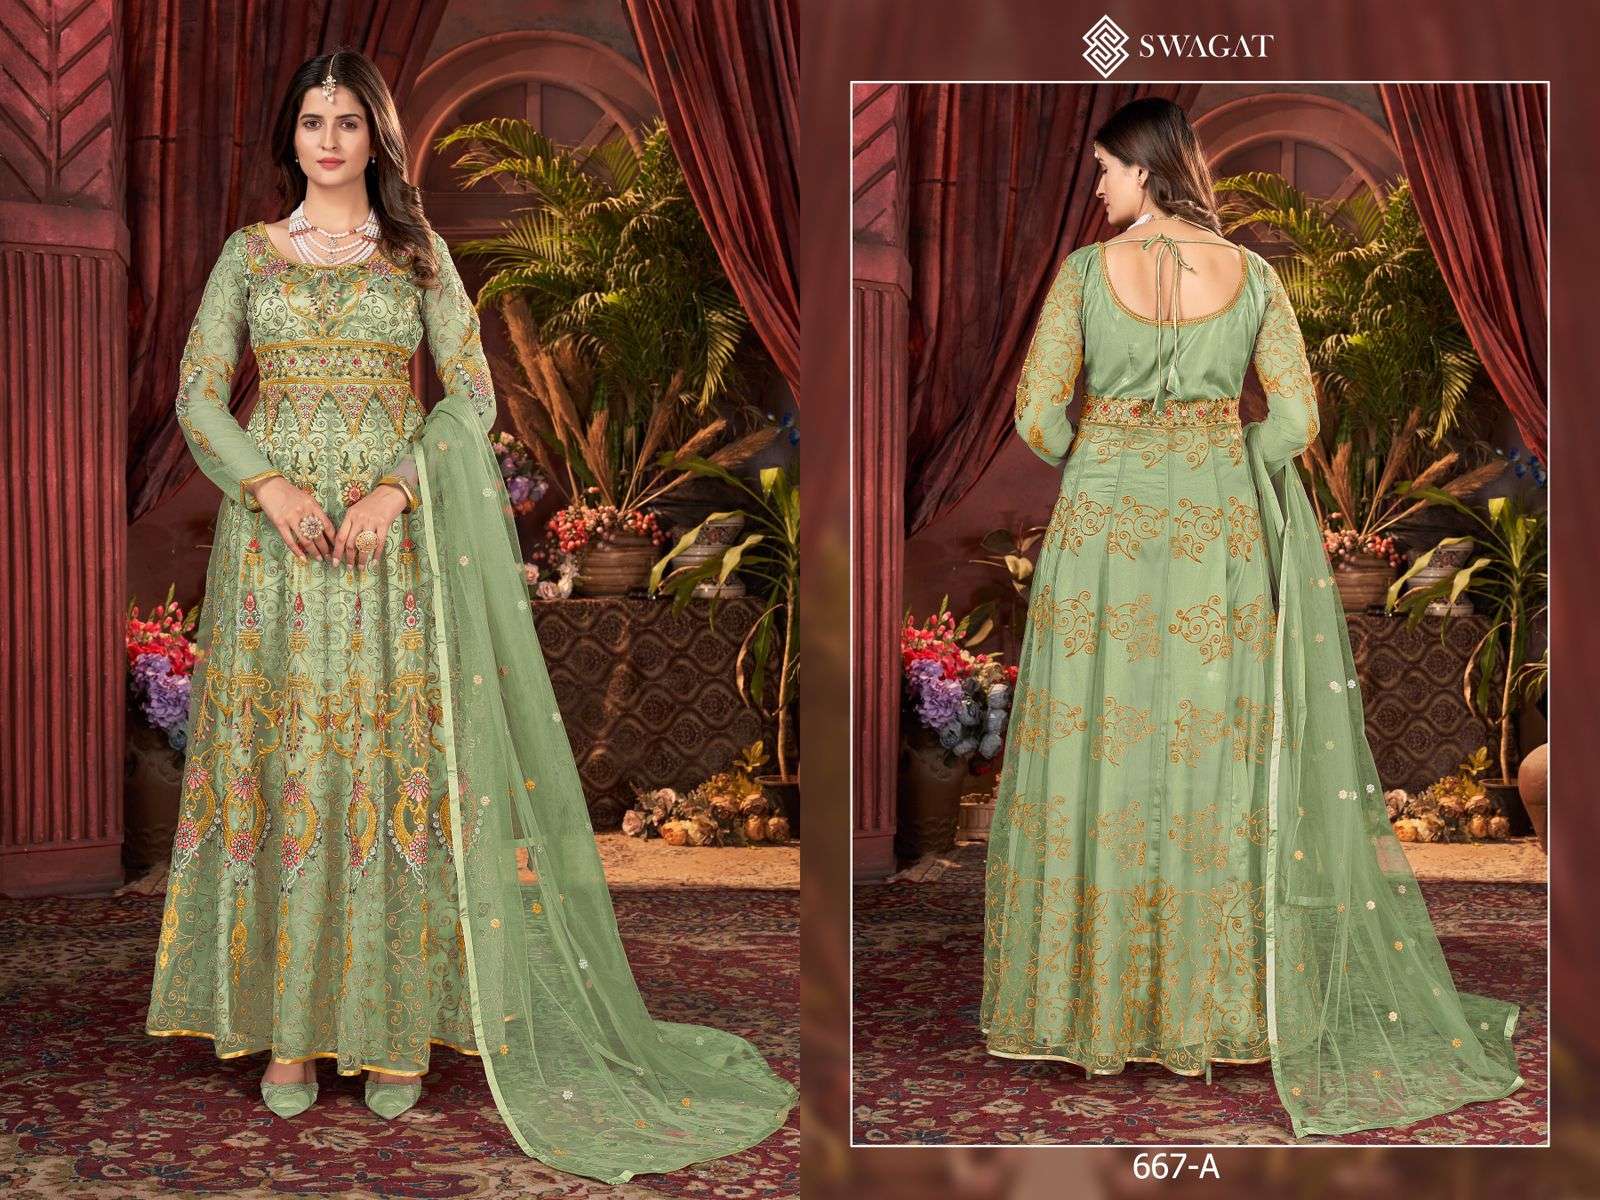 Swagat 667 Colors Partywear Anarakali Gown New Collection